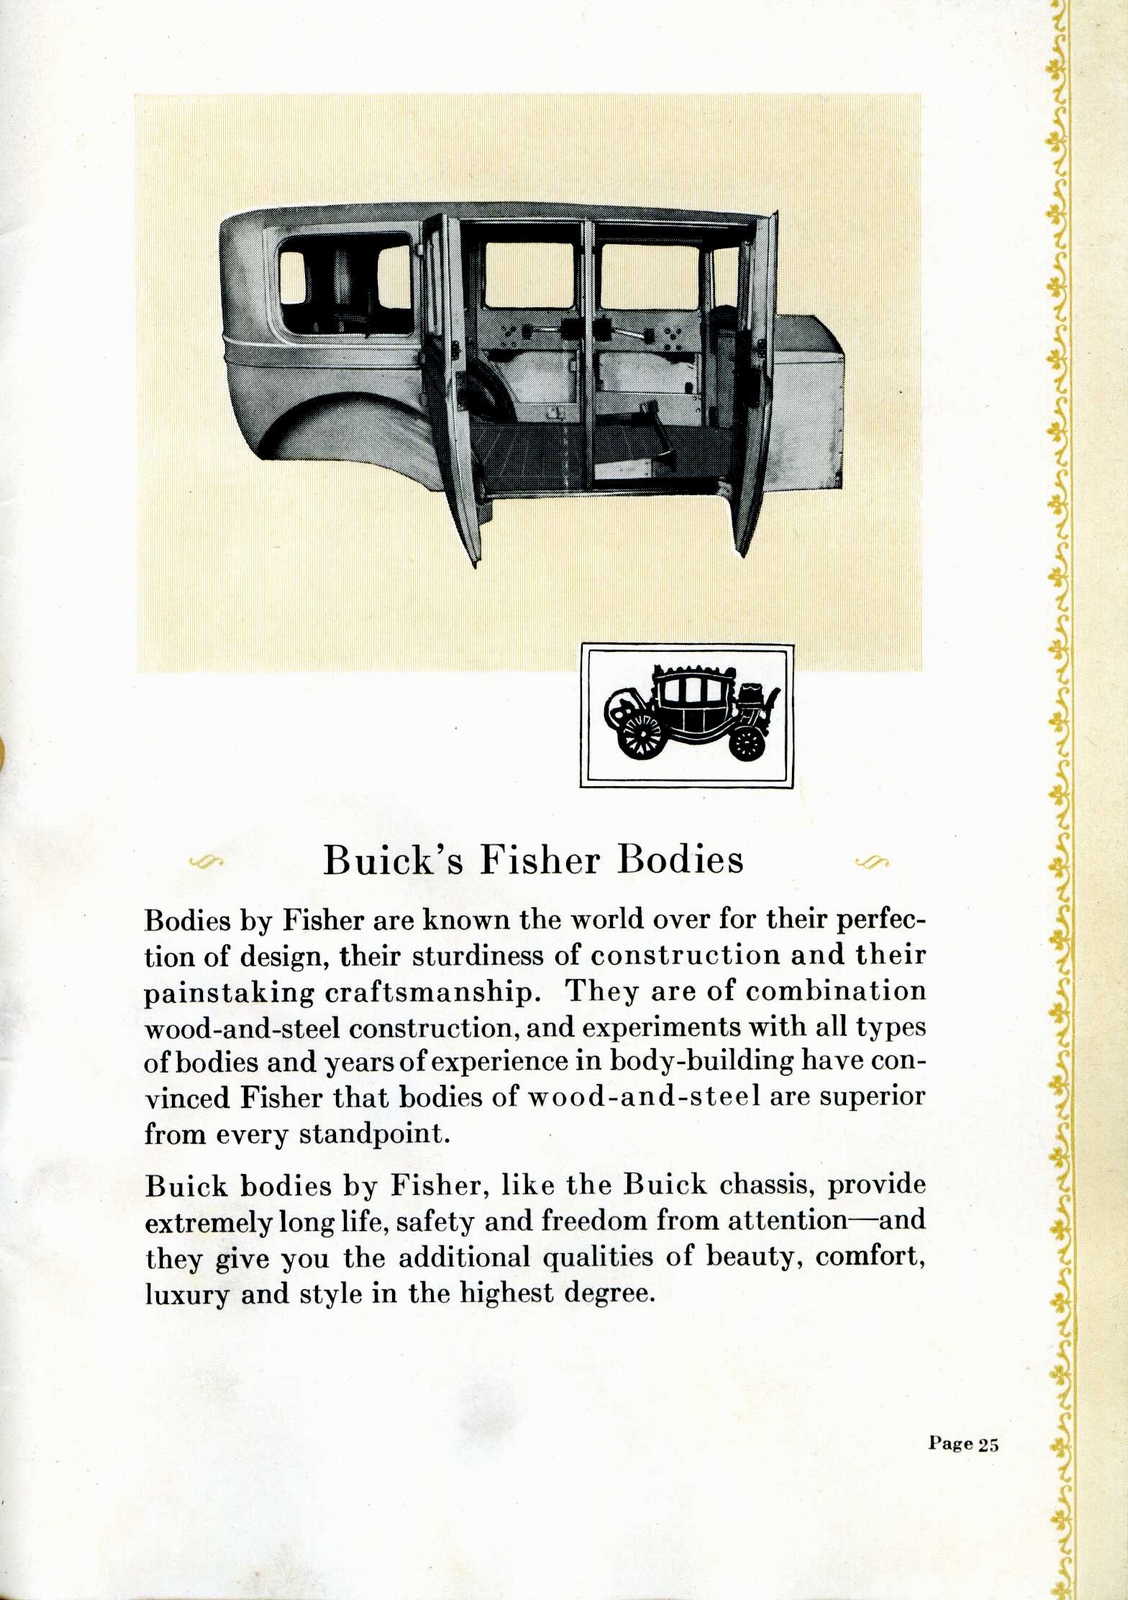 n_1928 Buick-How to Choose a Motor Car Wisely-25.jpg